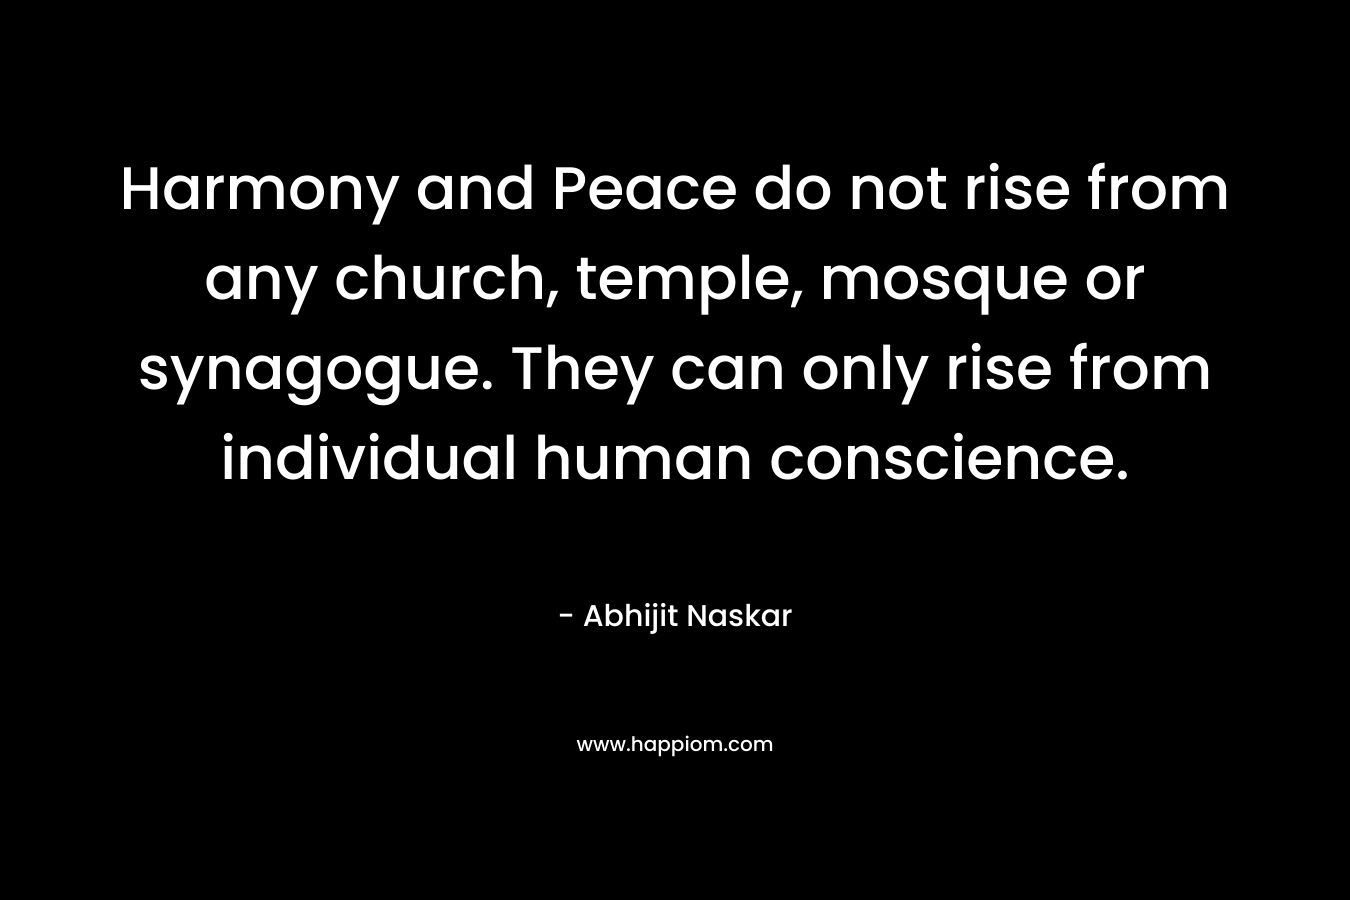 Harmony and Peace do not rise from any church, temple, mosque or synagogue. They can only rise from individual human conscience.